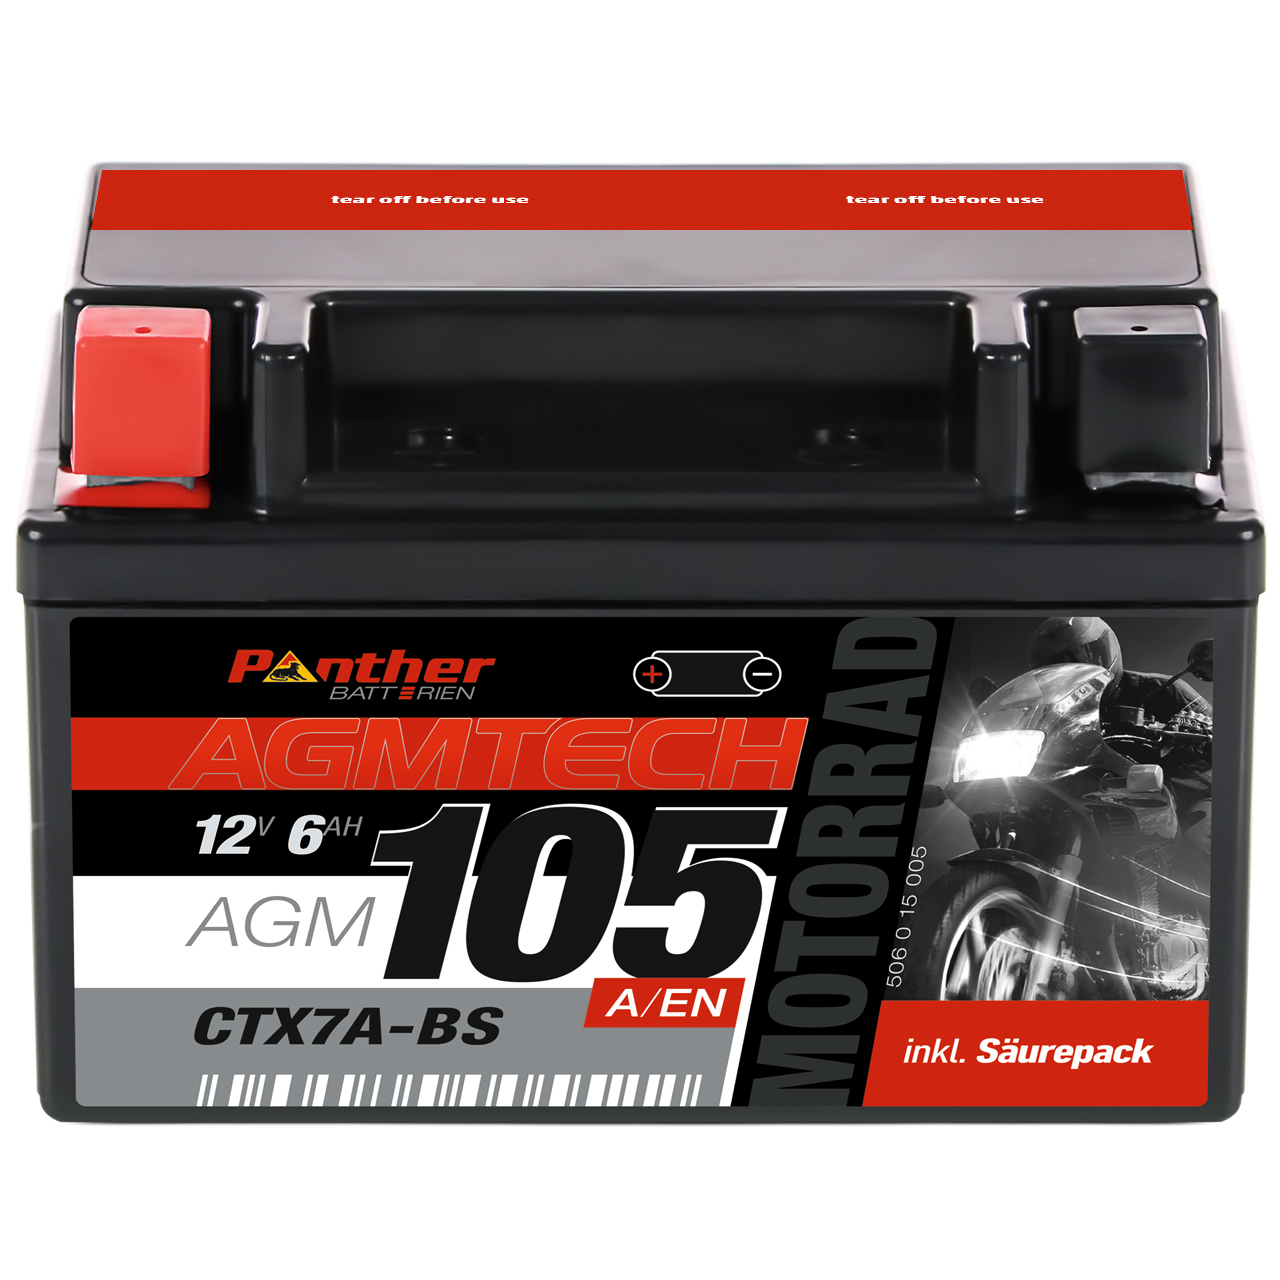 Panther AGM motor accu YTX7A-BS/ CTX7A-BS/ 50615